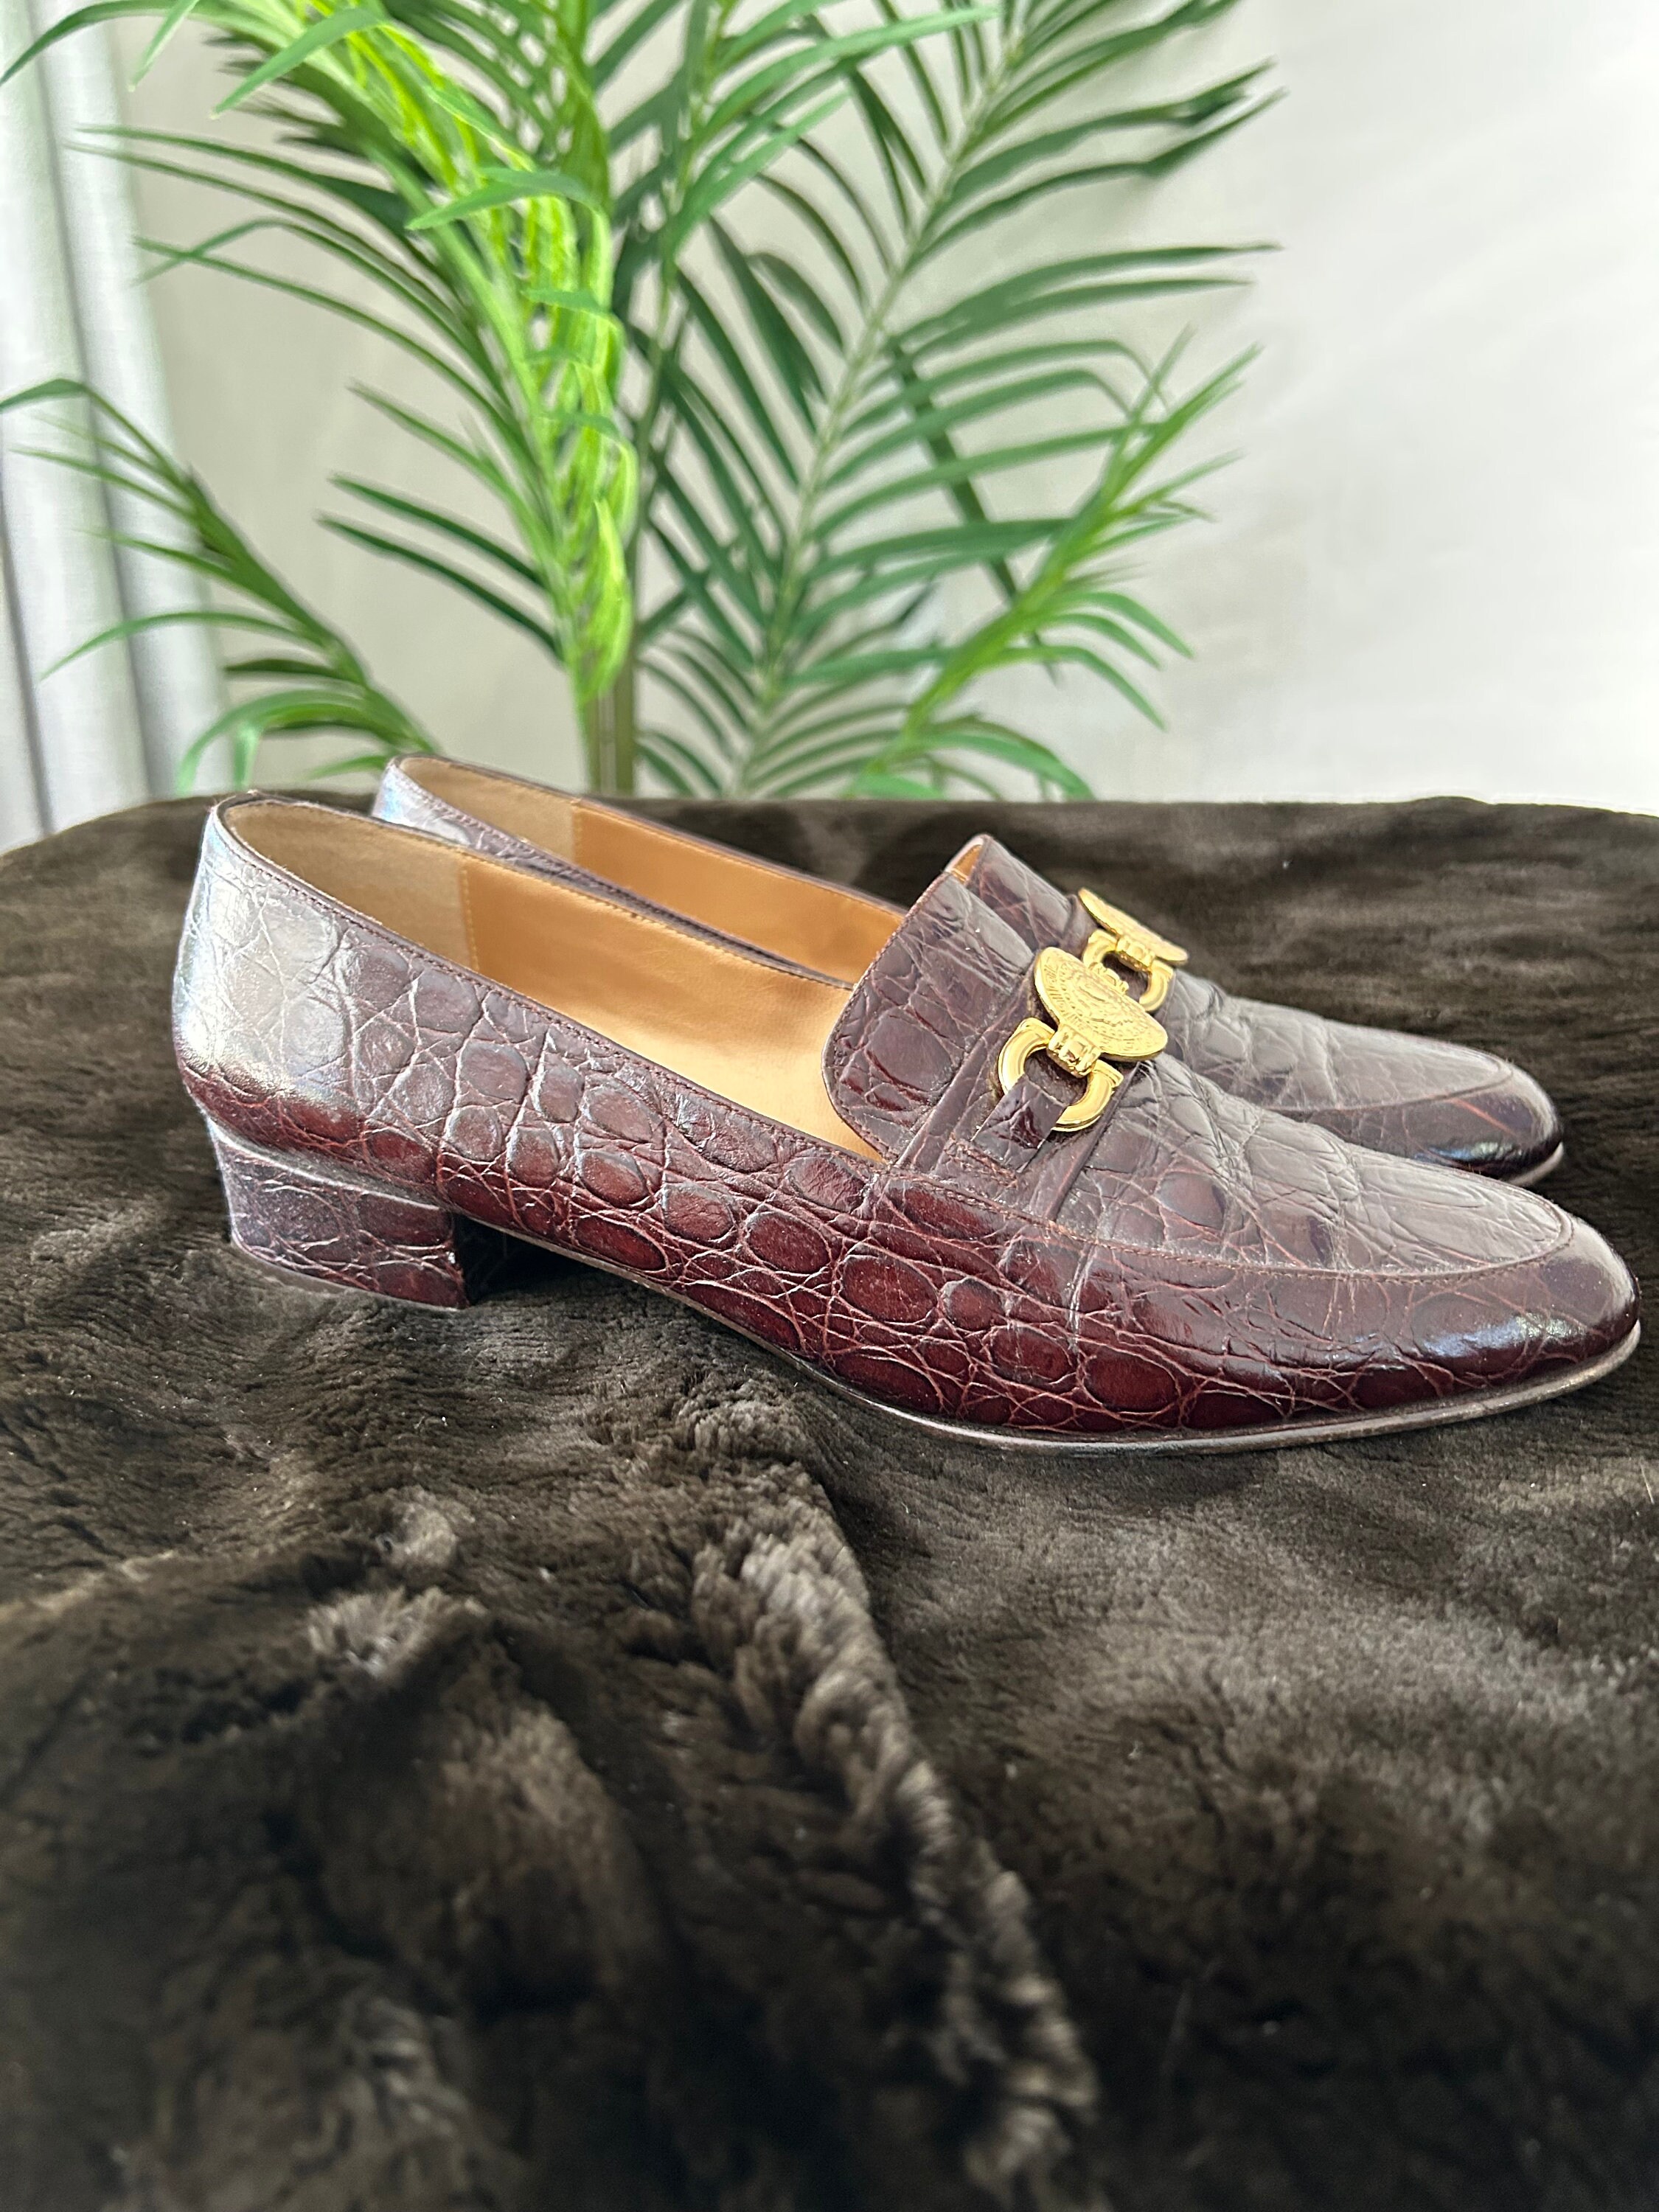 Printed Party Wear Louis Vuitton Brown Faux Leather Men's Loafers Shoes,  Loafer Shoe